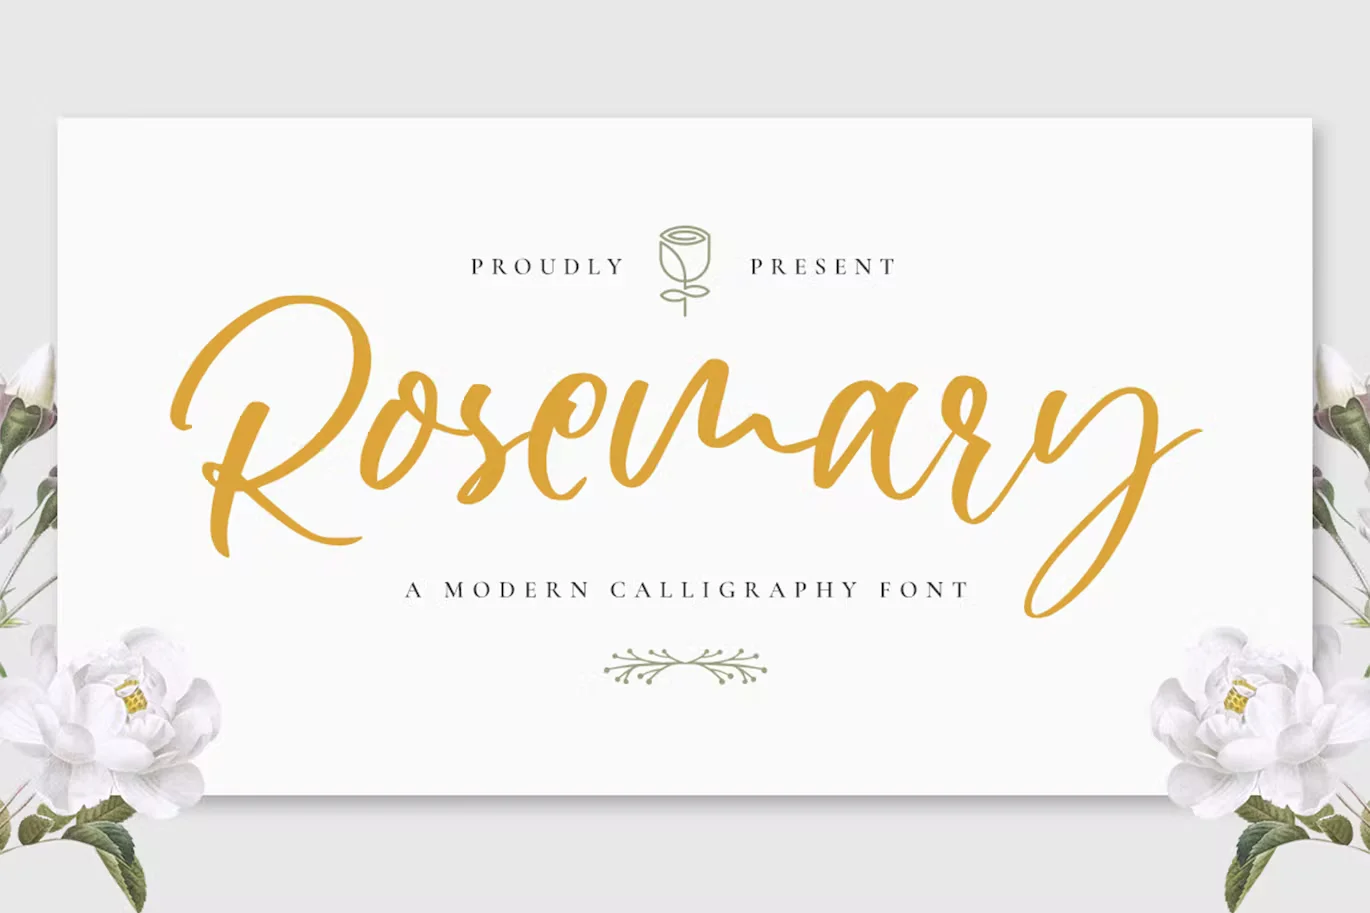 15 Beautiful Wedding Fonts for Your Invitations in 2023